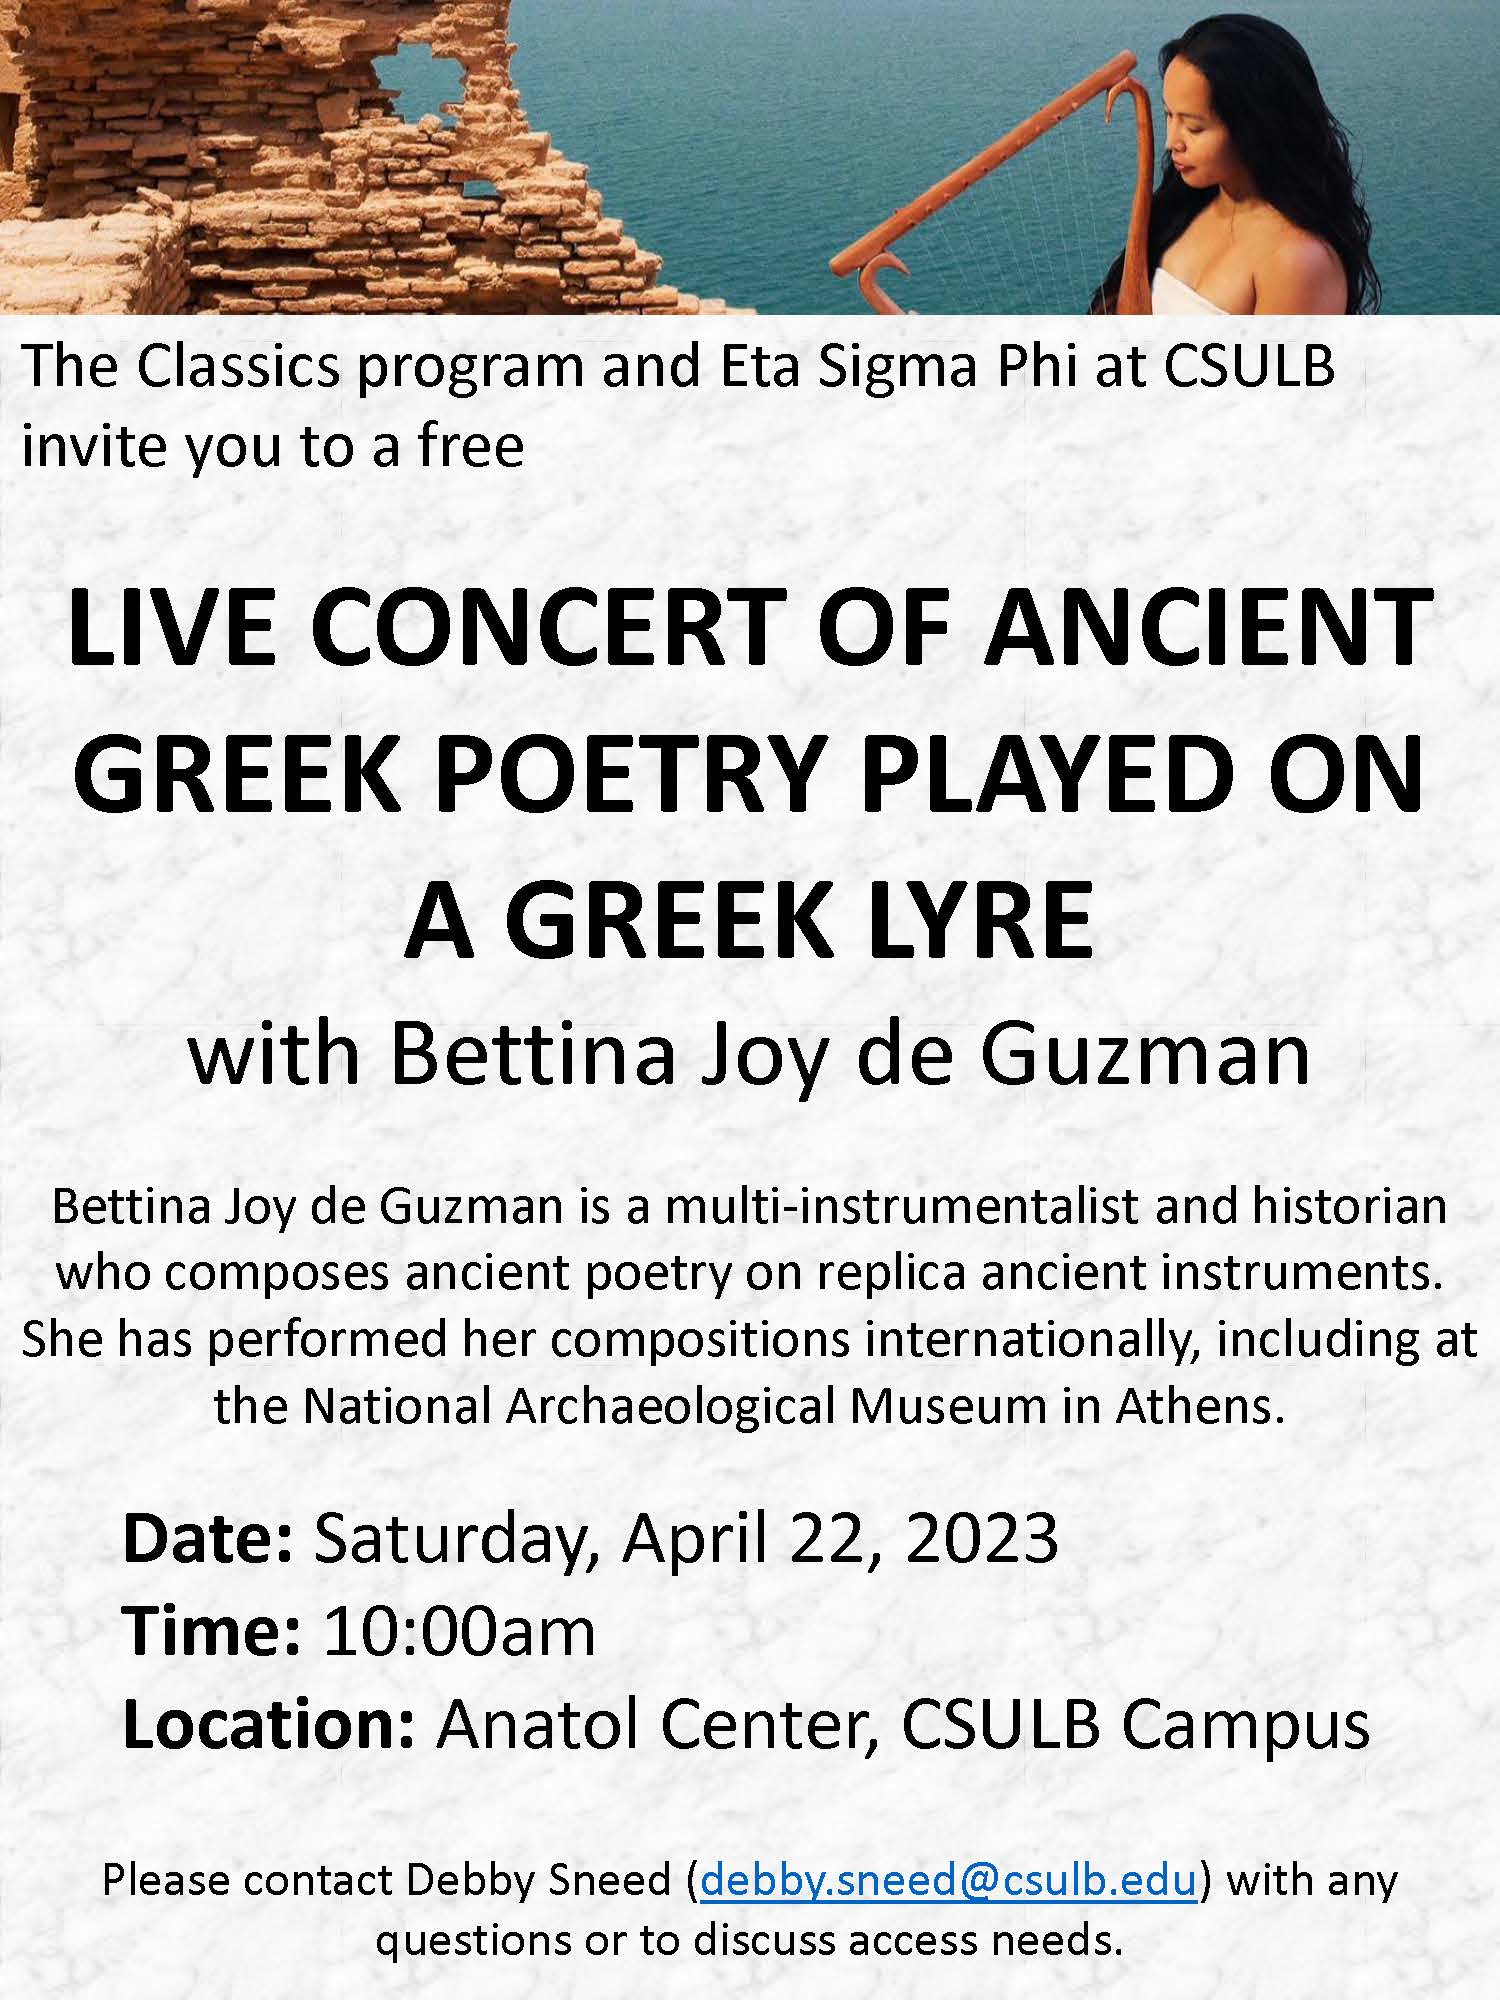 Poster for a live concert of ancient Greek poetry played on a Greek lyre, with Bettina Joy de Guzman, hosted by the Classics program and Eta Sigma Phi at CSULB. Bettina Joy de Guzman is a multi-instrumentalist and historian who composes ancient poetry on replica ancient instruments. She has performed her compositions internationally, including at the National Archaeological Museum in Athens. The event is Saturday, April 22, 2023 at 10:00am in the Anatol Center at CSULB. Contact Debby Sneed (debby.sneed@csulb.edu) with questions or to discuss access needs. Photo at top of poster is of the performer holding a lyre with the sea and mudbricks in the background. 